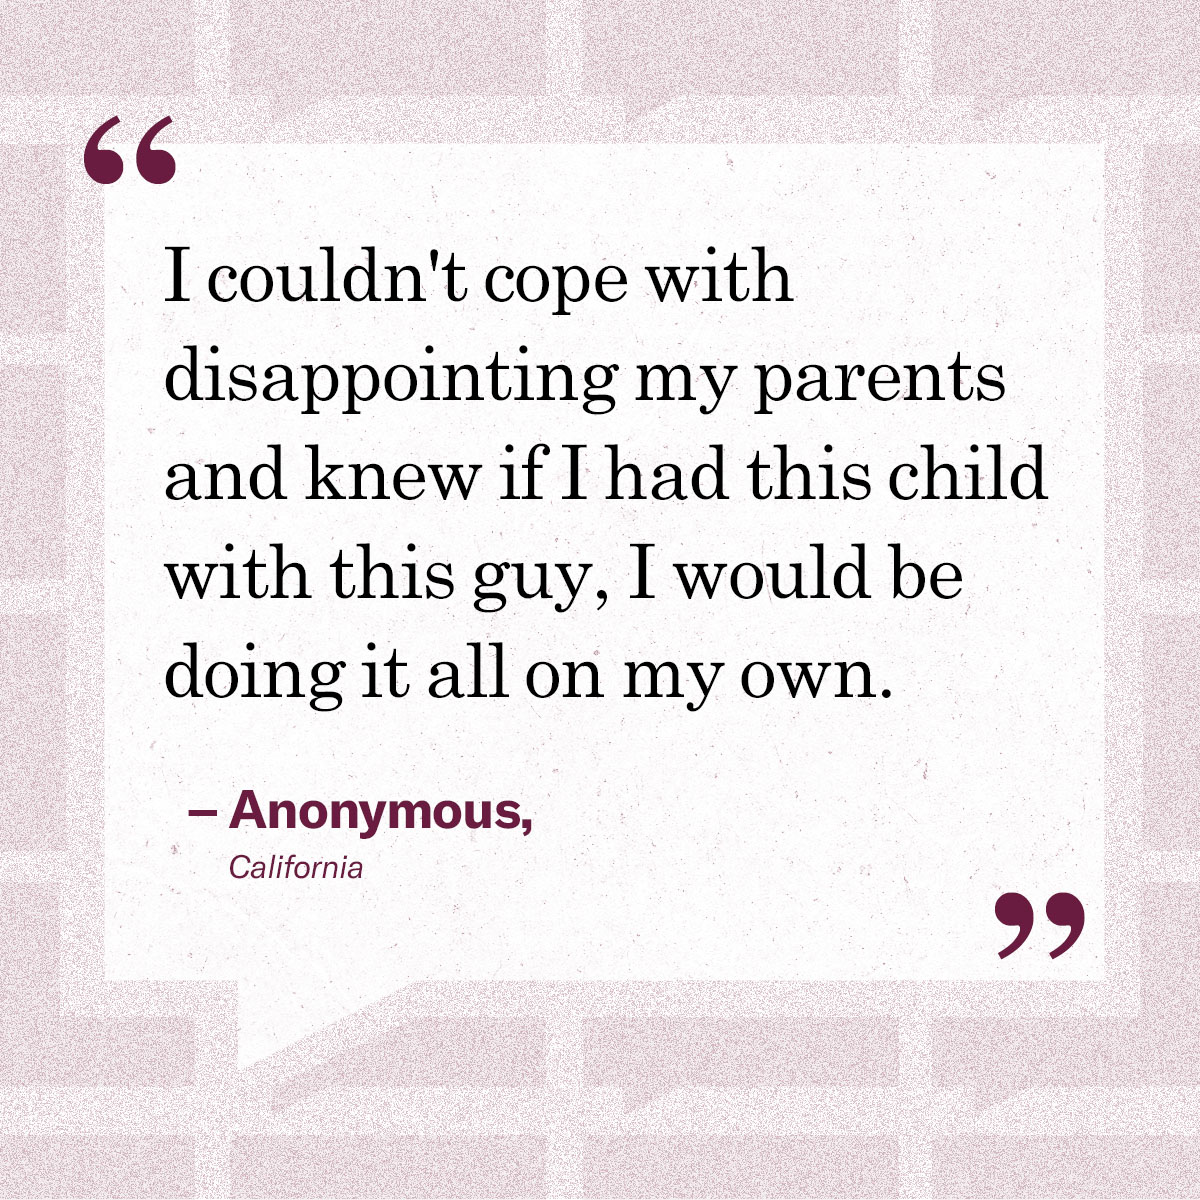 “I couldn't cope with disappointing my parents and knew if I had this child with this guy, I would be doing it all on my own.” – Anonymous, California